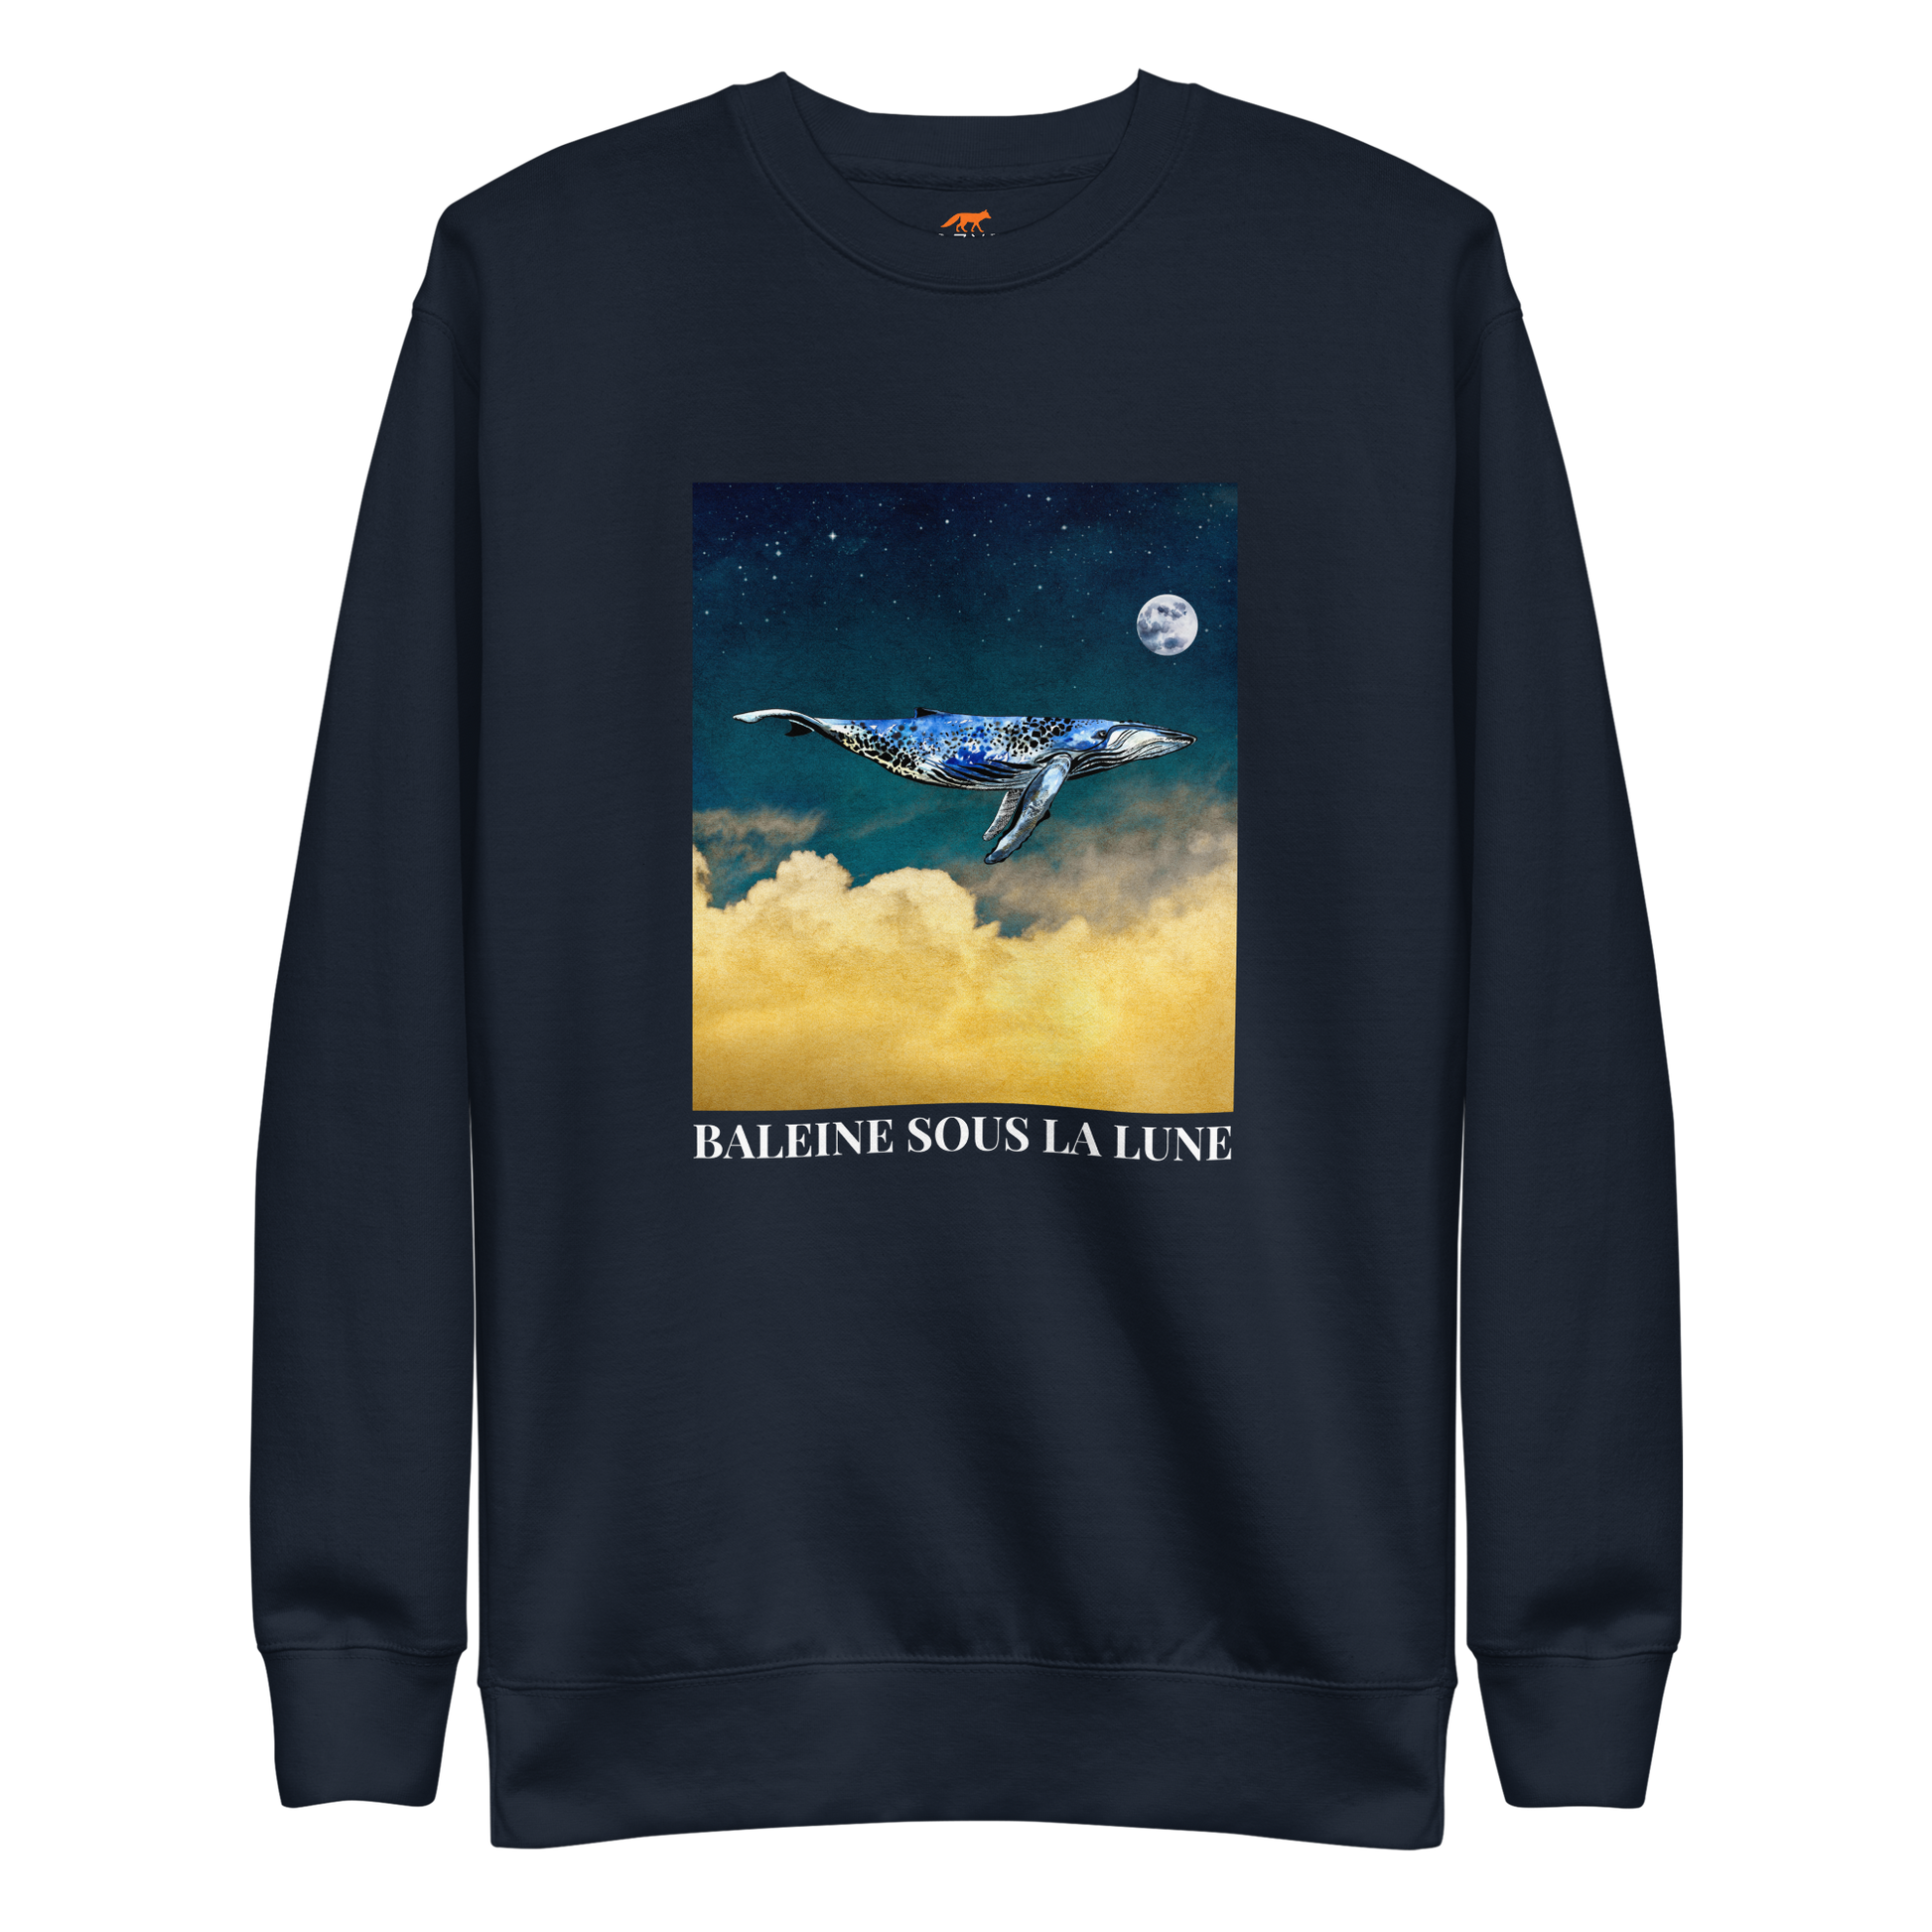 Navy Blazer Premium Whale Sweatshirt featuring a majestic Whale Under The Moon graphic on the chest - Cool Graphic Whale Sweatshirts - Boozy Fox